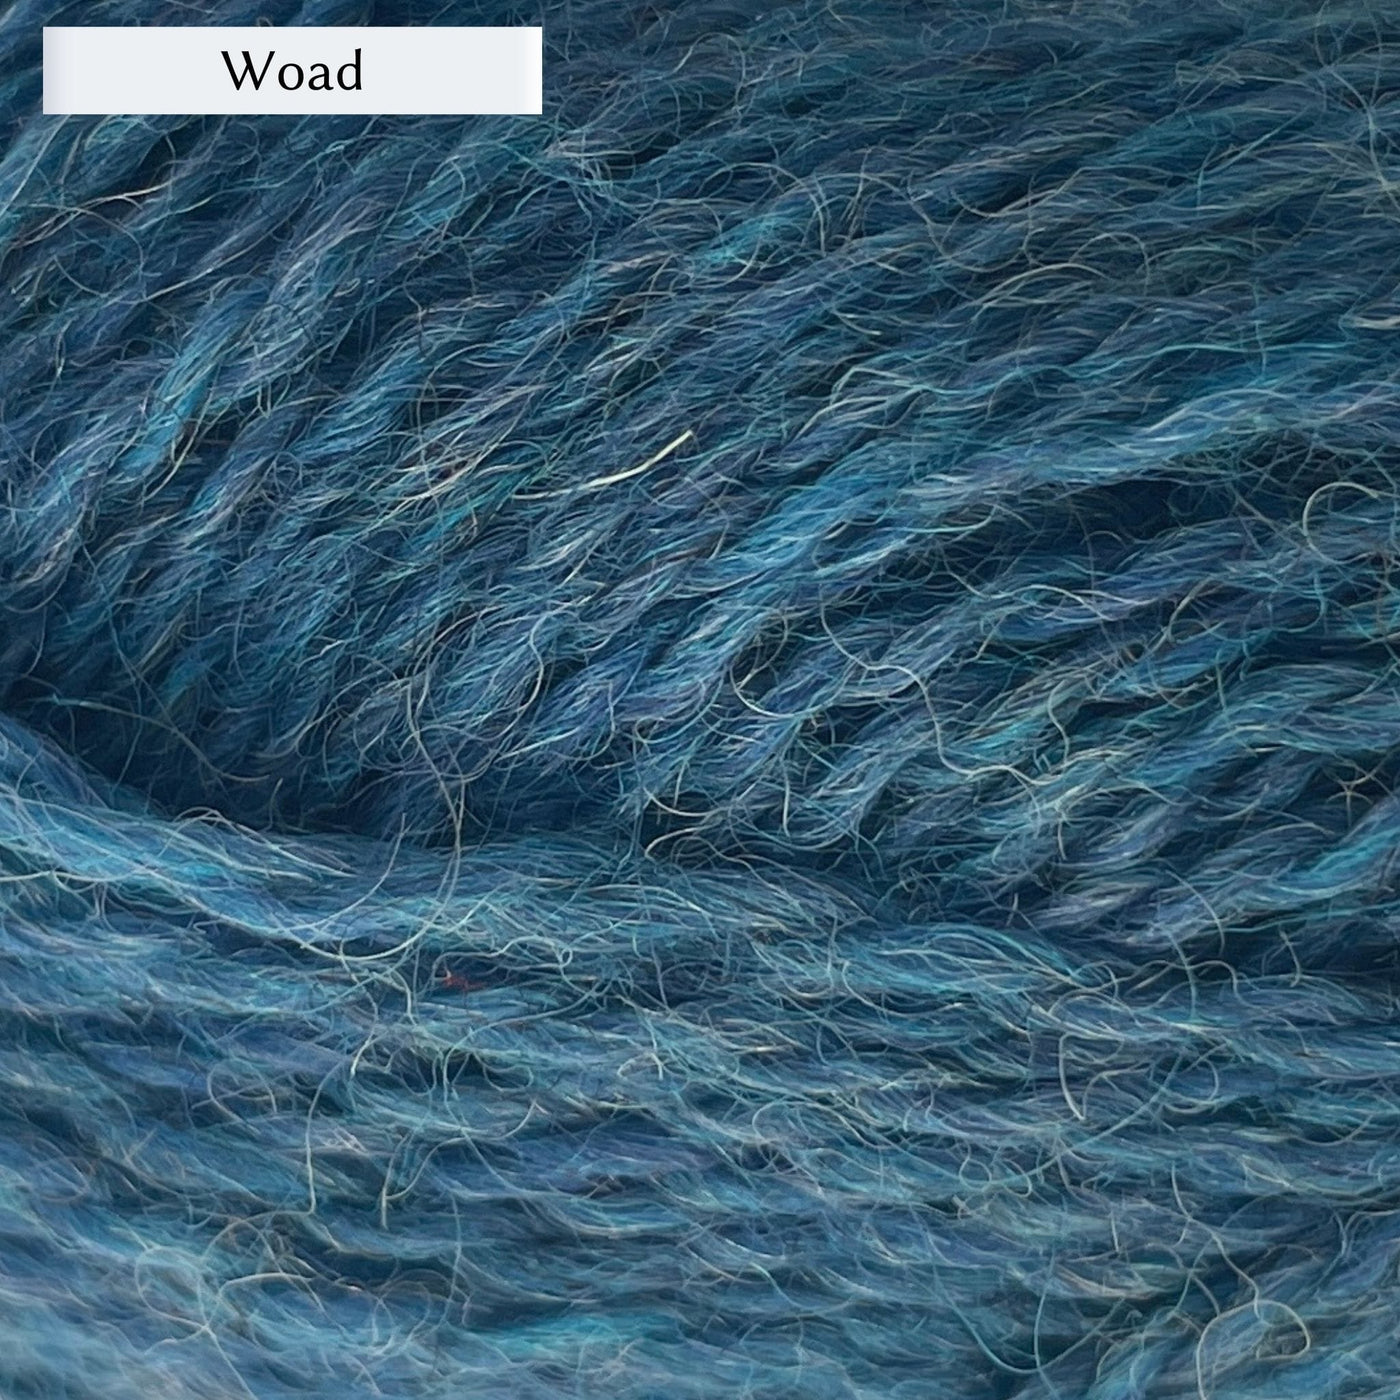 Marie Wallin's British Breeds yarn, a fingering weight, in color Woad, a medium blue-green